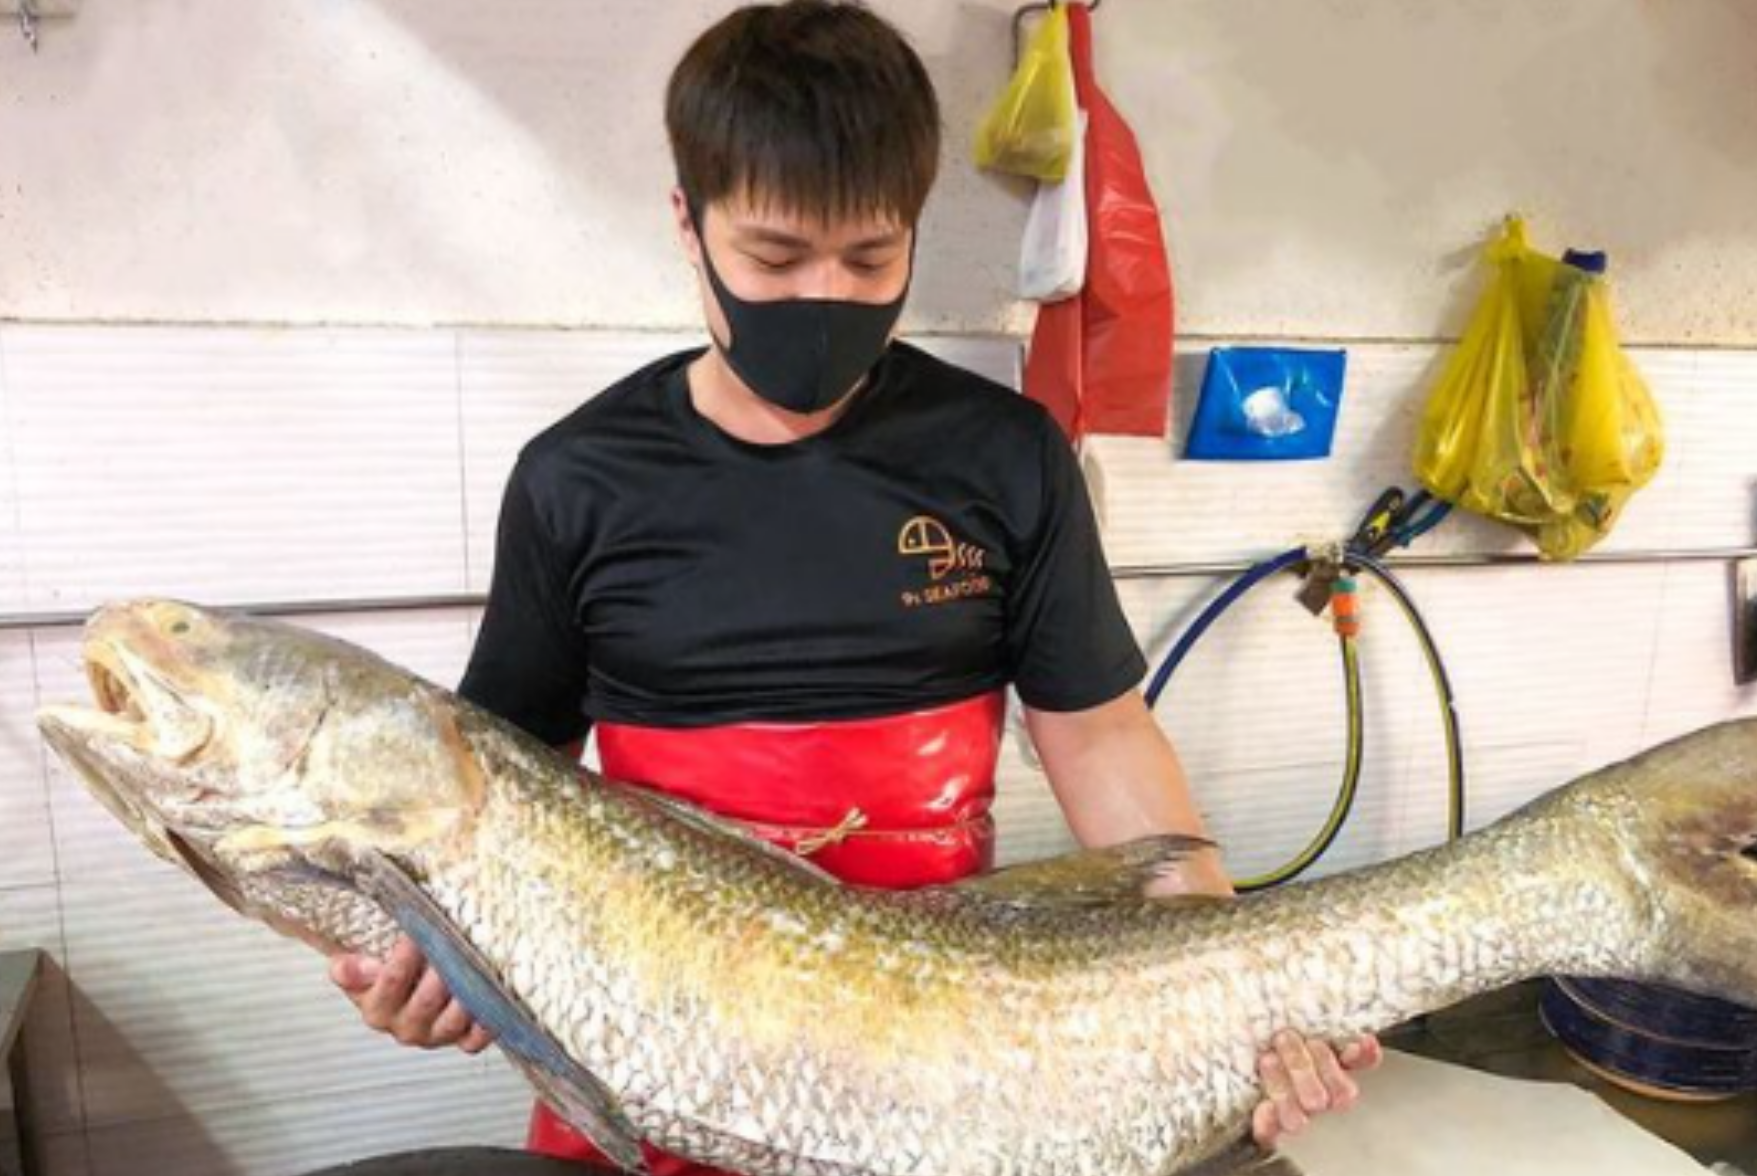 A 9s Seafood staff holding a humongous fish!